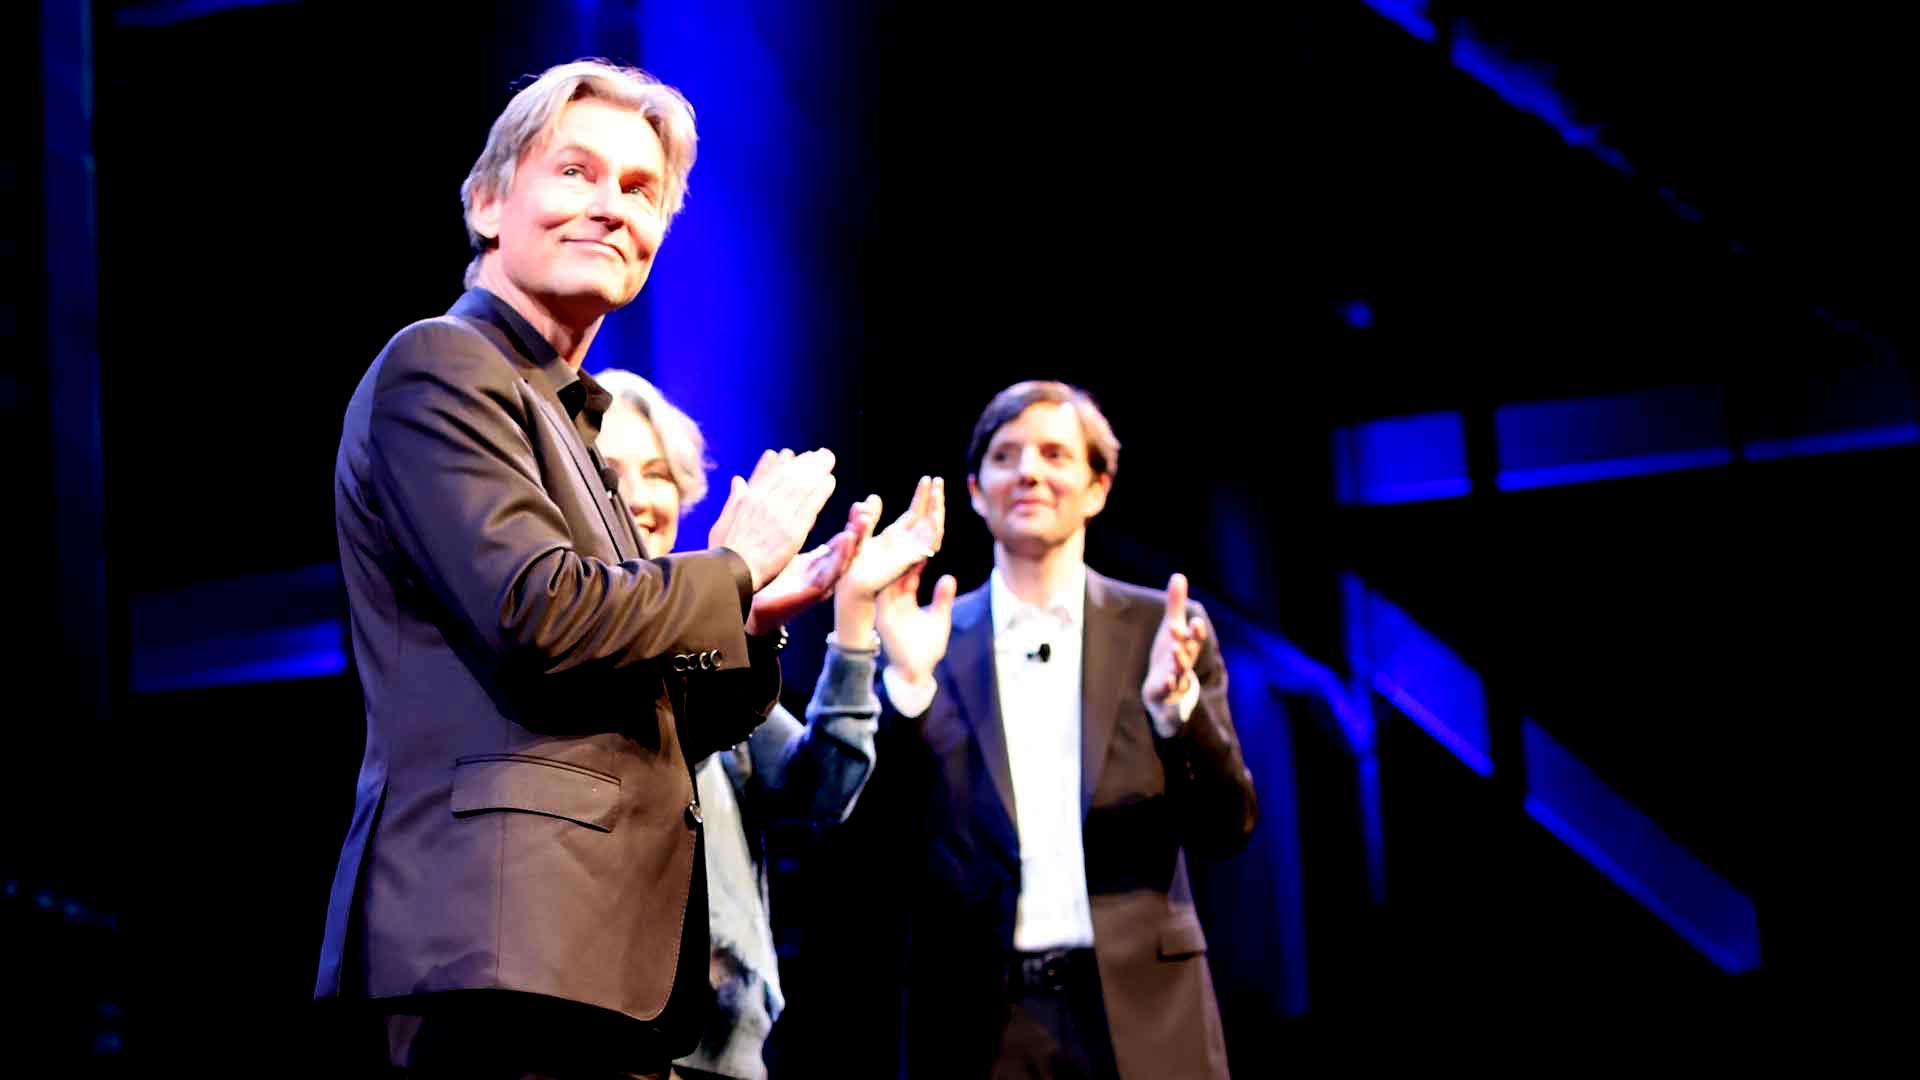 Esa-Pekka Salonen accepts his appointment as new Music Director of the San Francisco Symphony at a welcome party, Dec. 5, 2018.